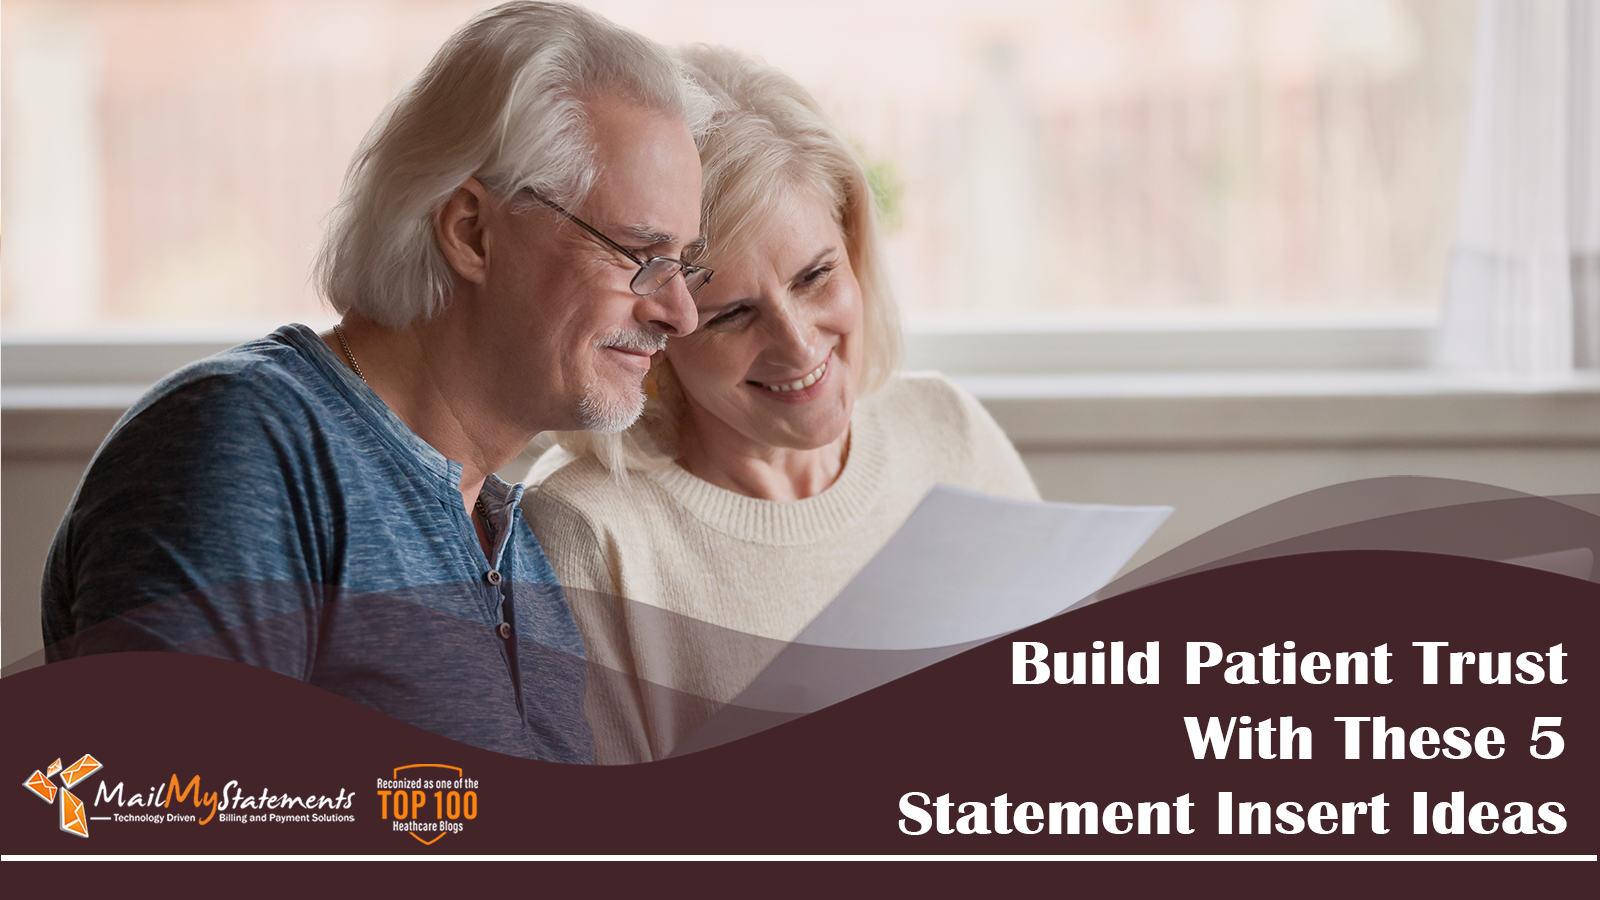 Build Patient Trust With These 5 Statement Insert Ideas